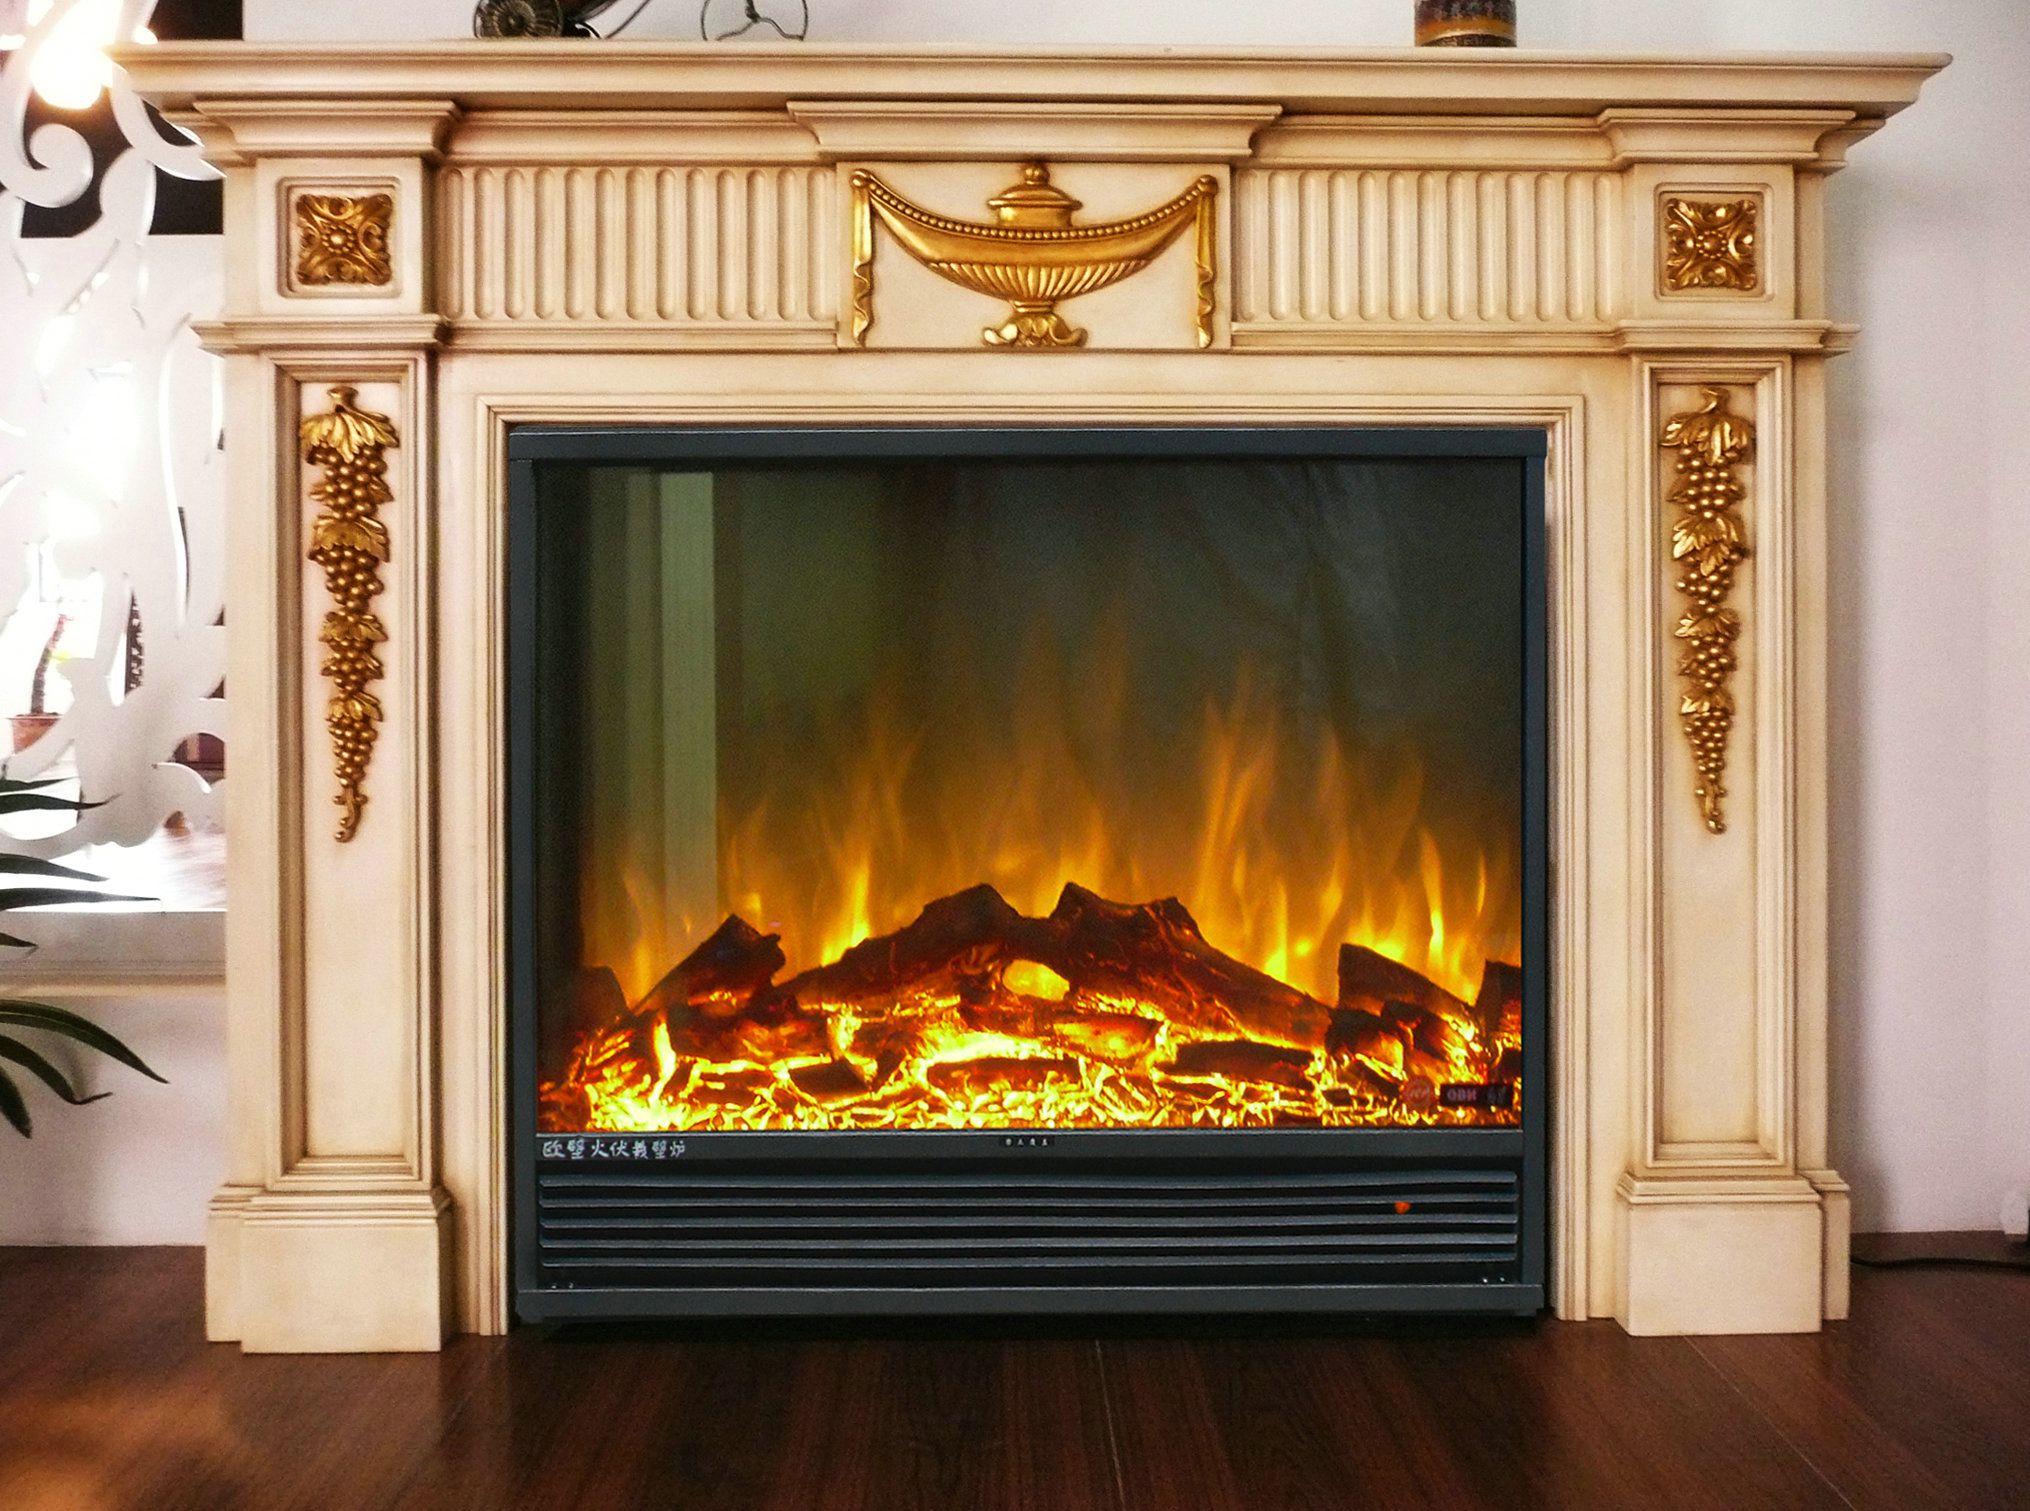 Cast-iron fireplace Can be customized Heating installation